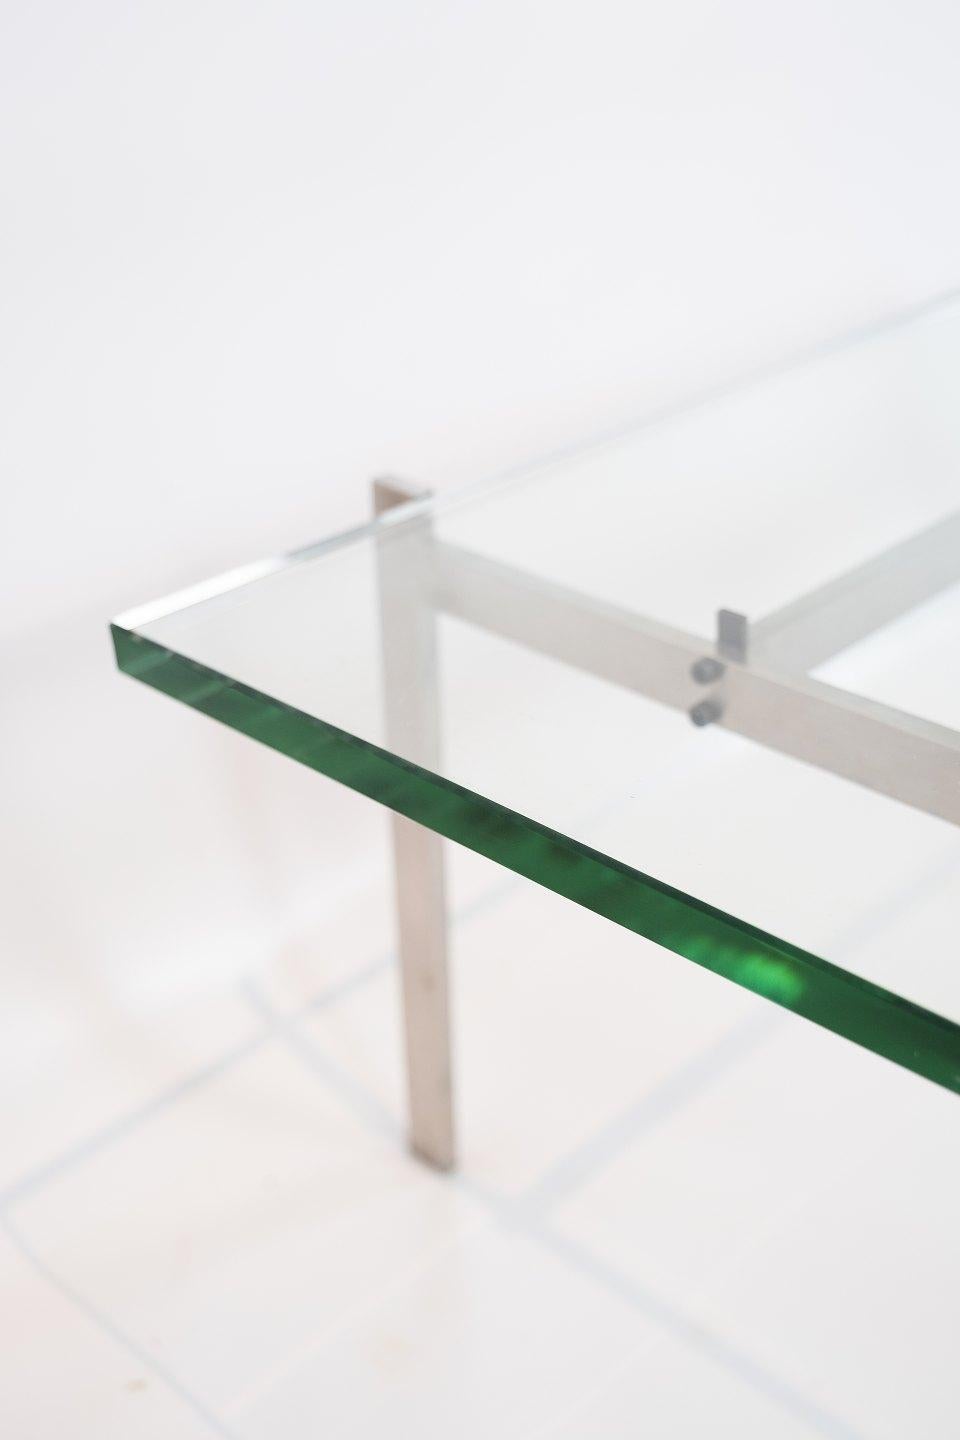 Danish Coffee Table, Model PK61, of Glass and Stainless Steel Designed by Poul Kjærholm